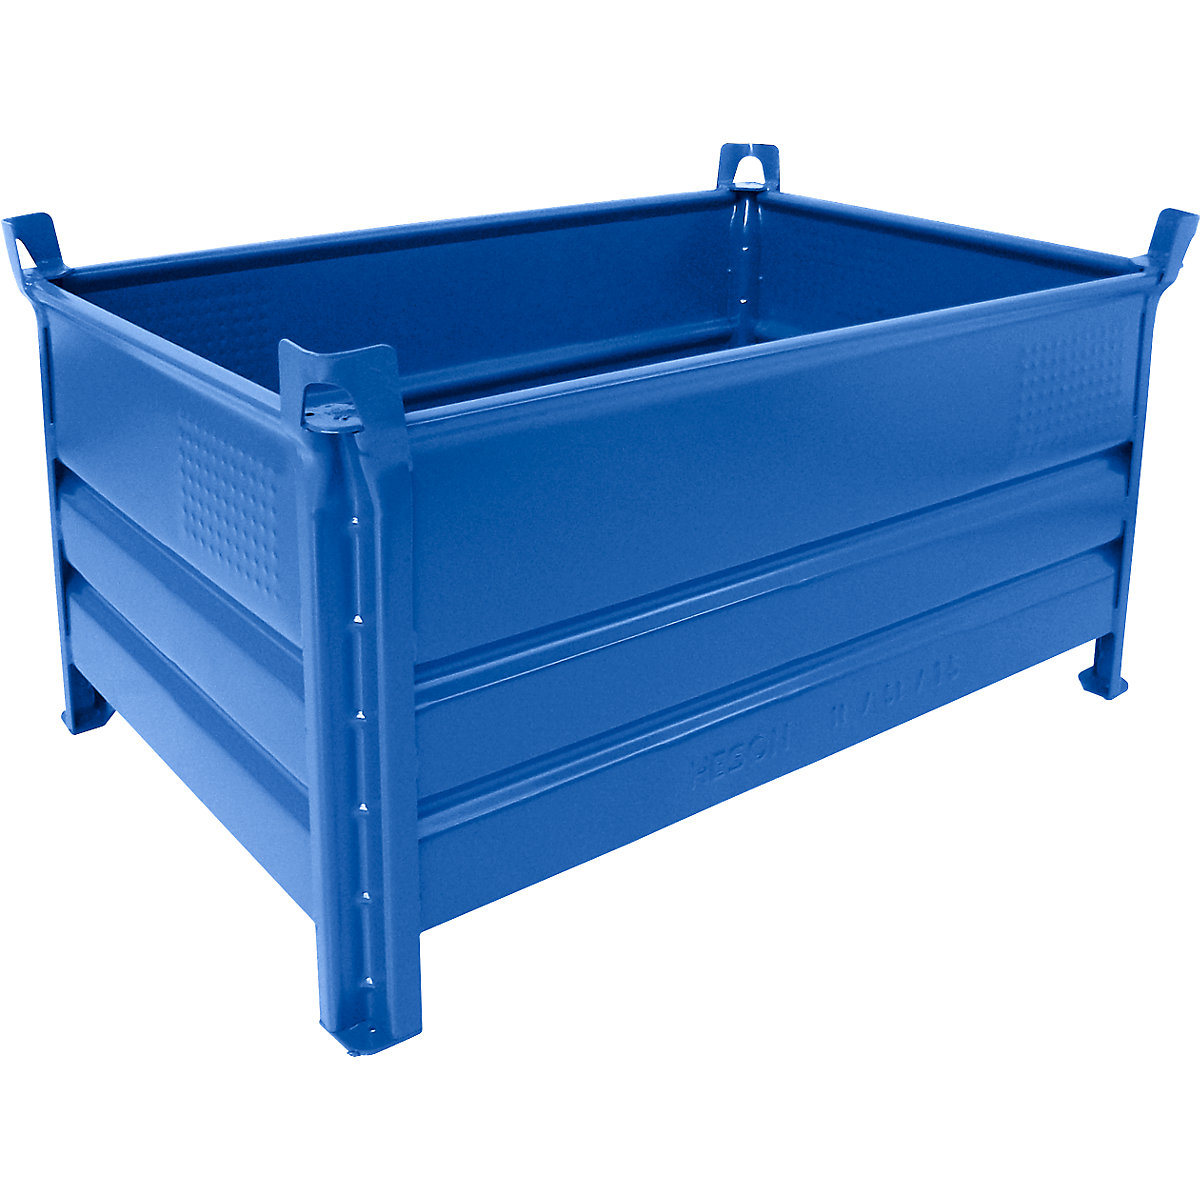 Solid panel box pallet – Heson, WxL 800 x 1200 mm, max. load 2000 kg, blue, 10+ items-6